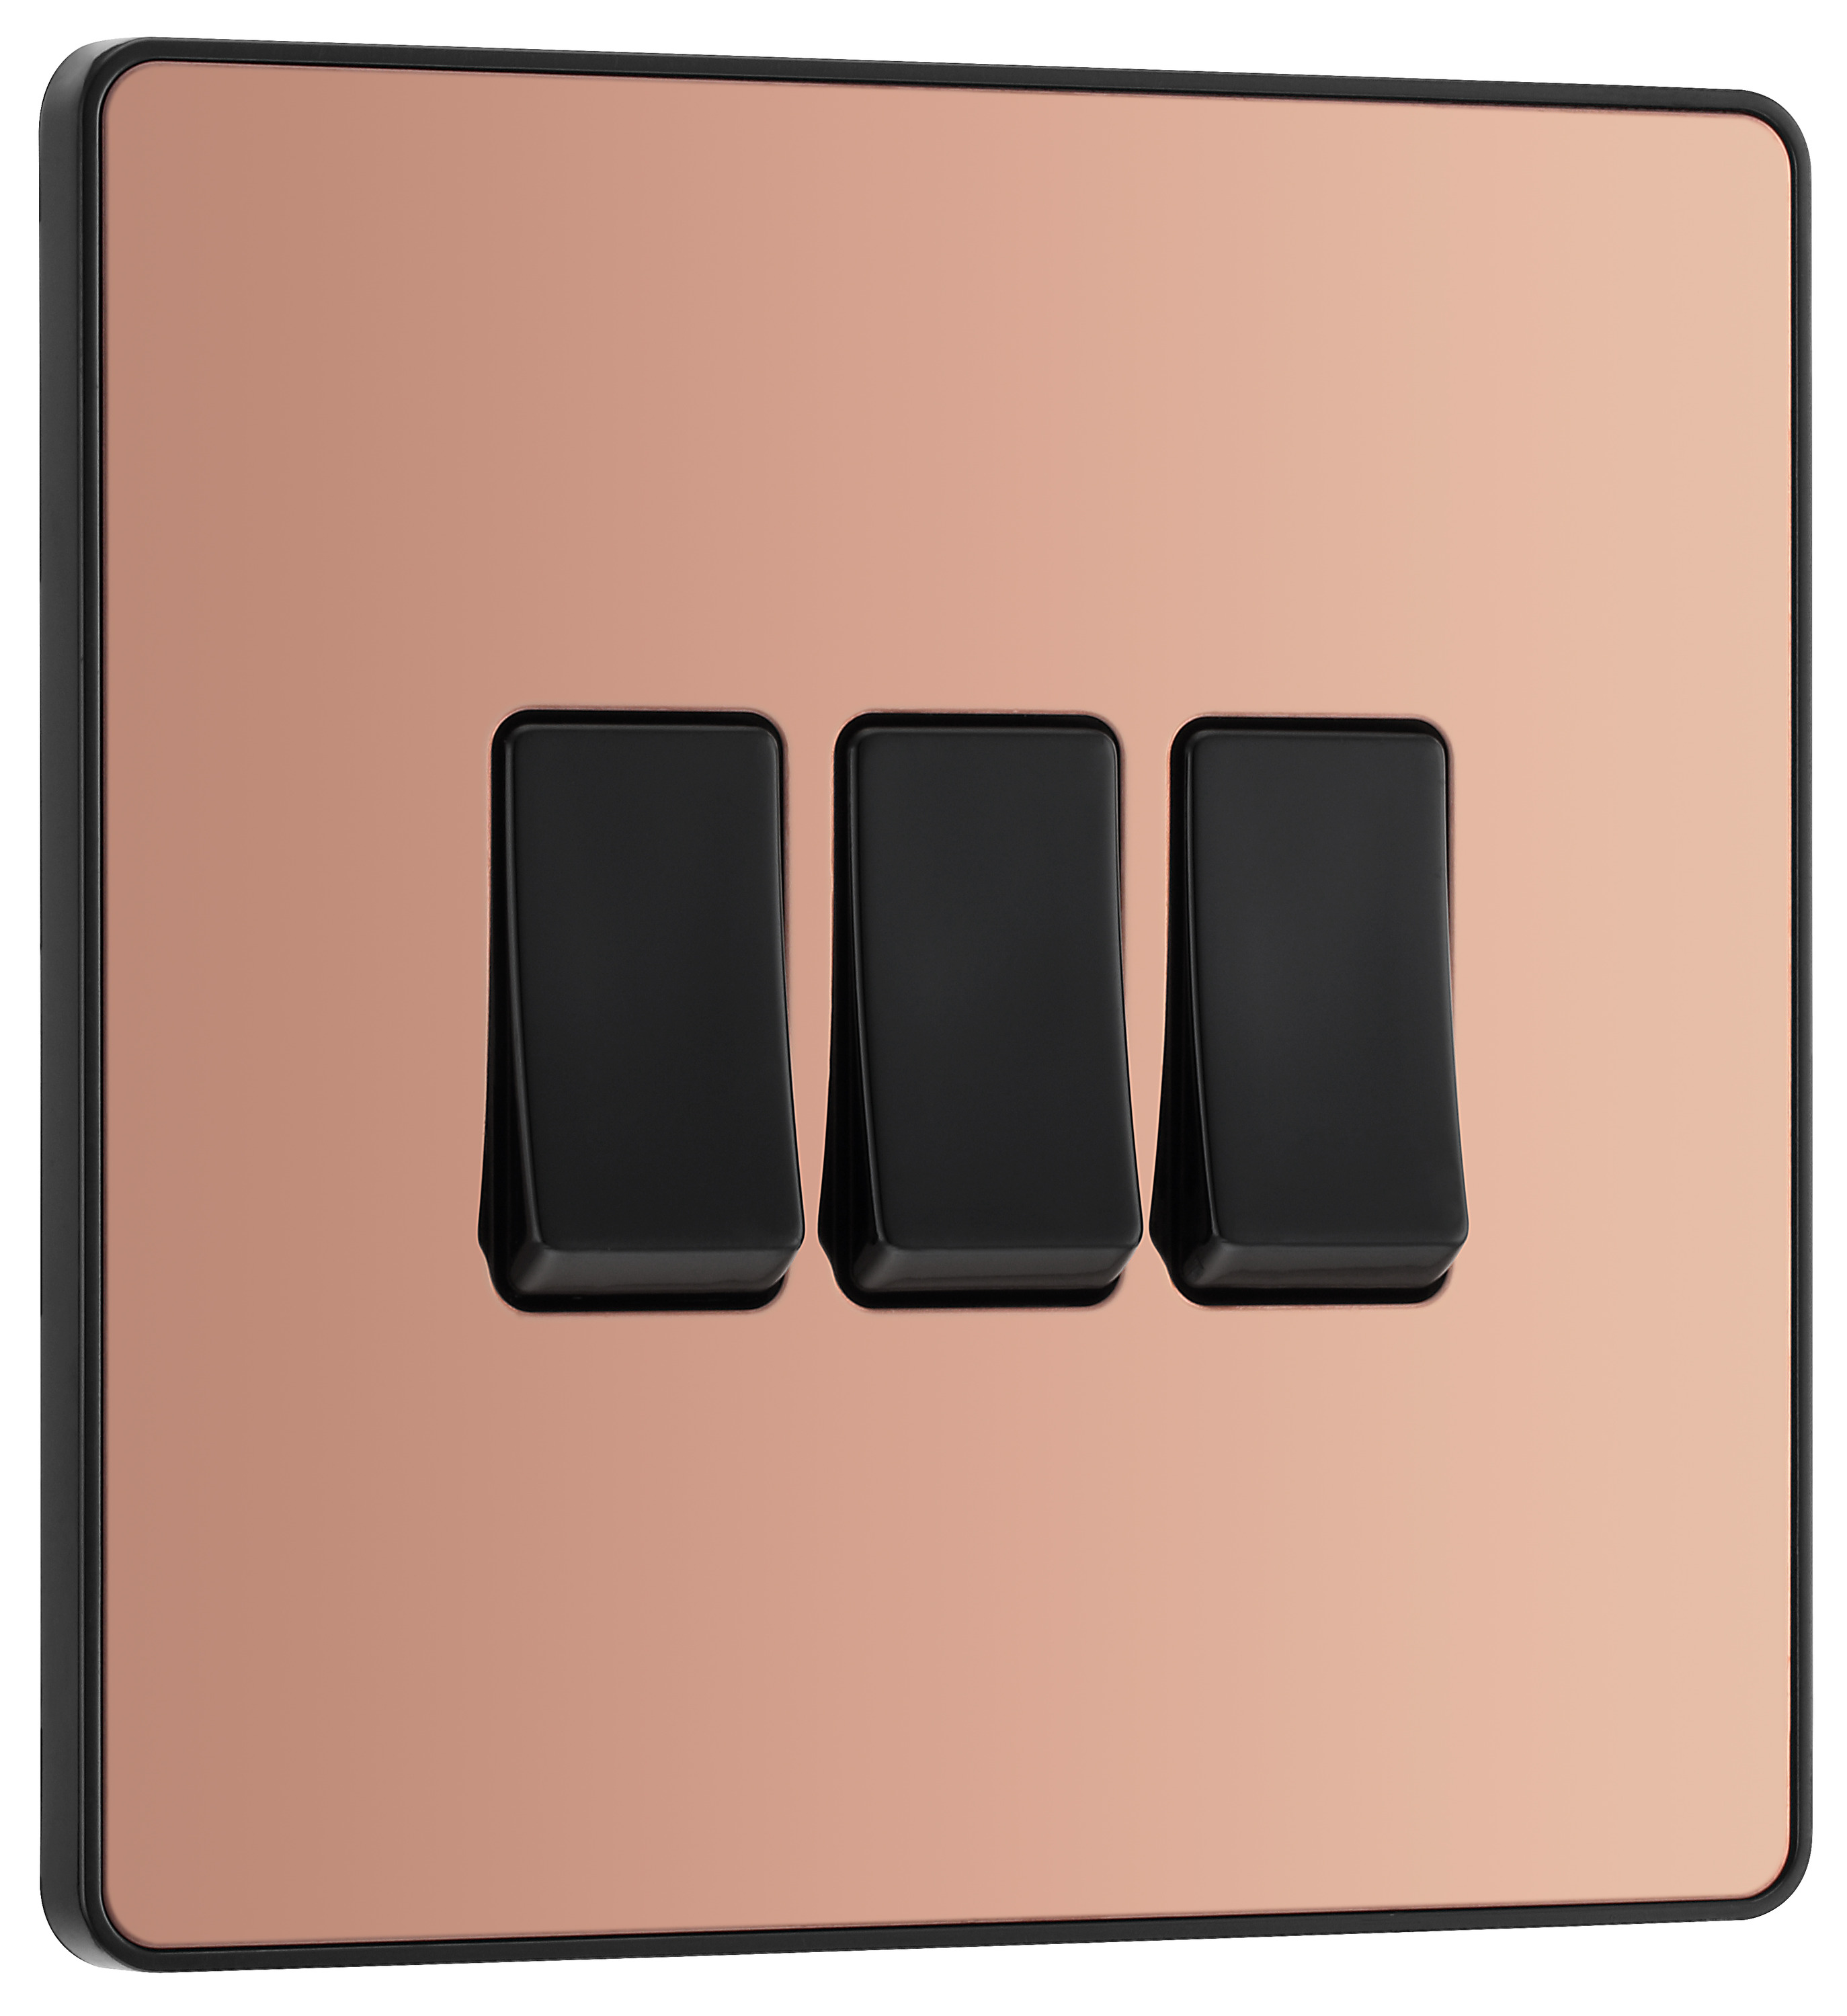 Image of BG Evolve Polished Copper 20A 16Ax Triple Light Switch - 2 Way